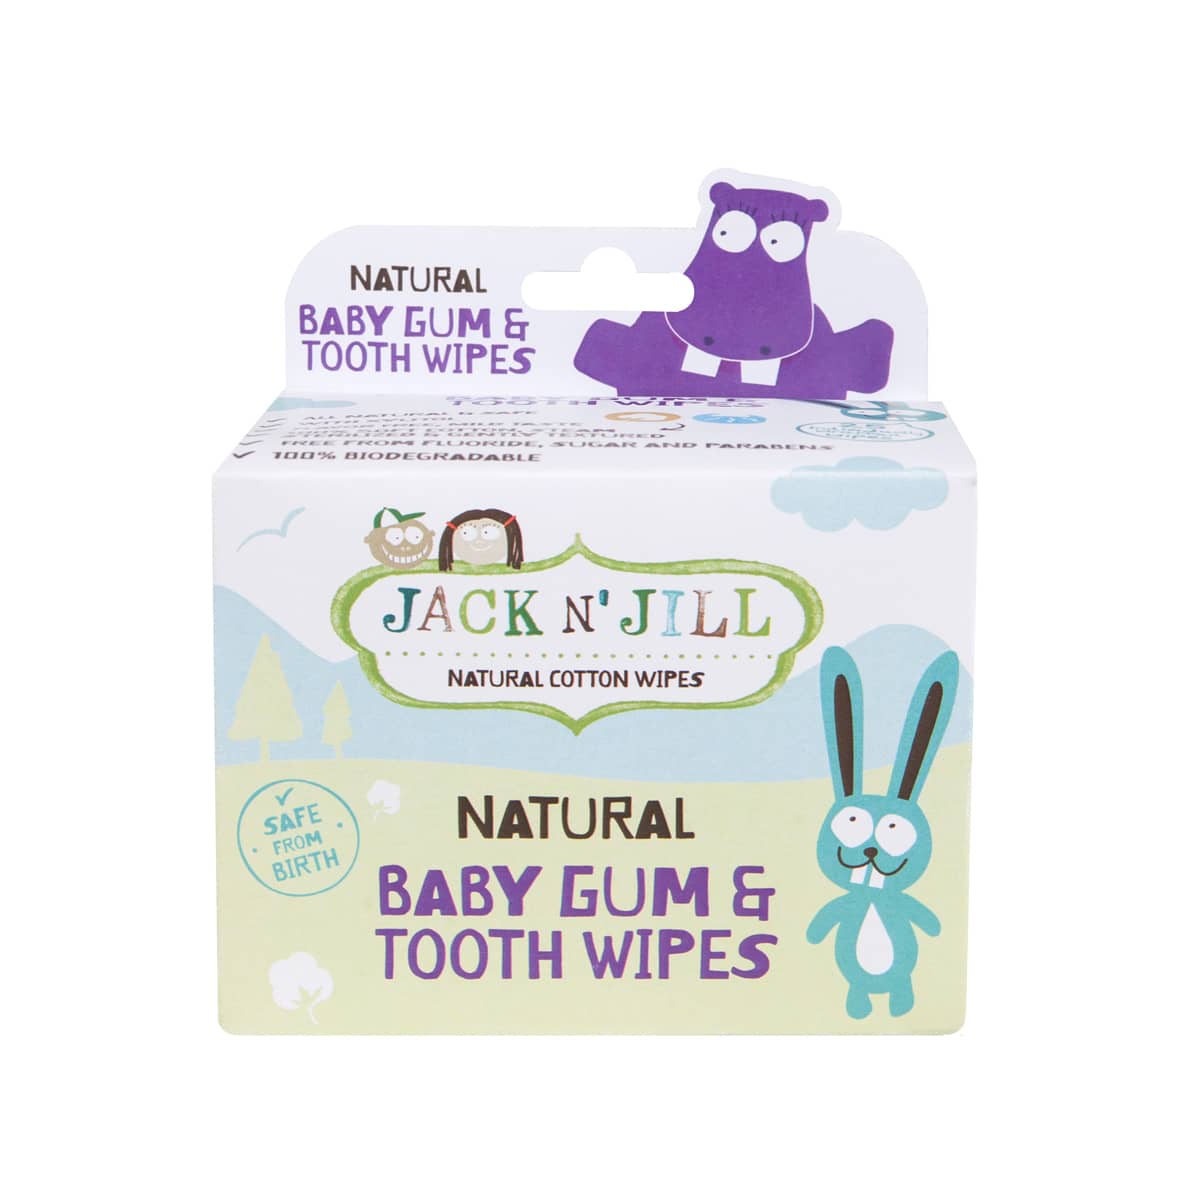 Jack N' Jill Natural Baby and Gum Tooth Wipes